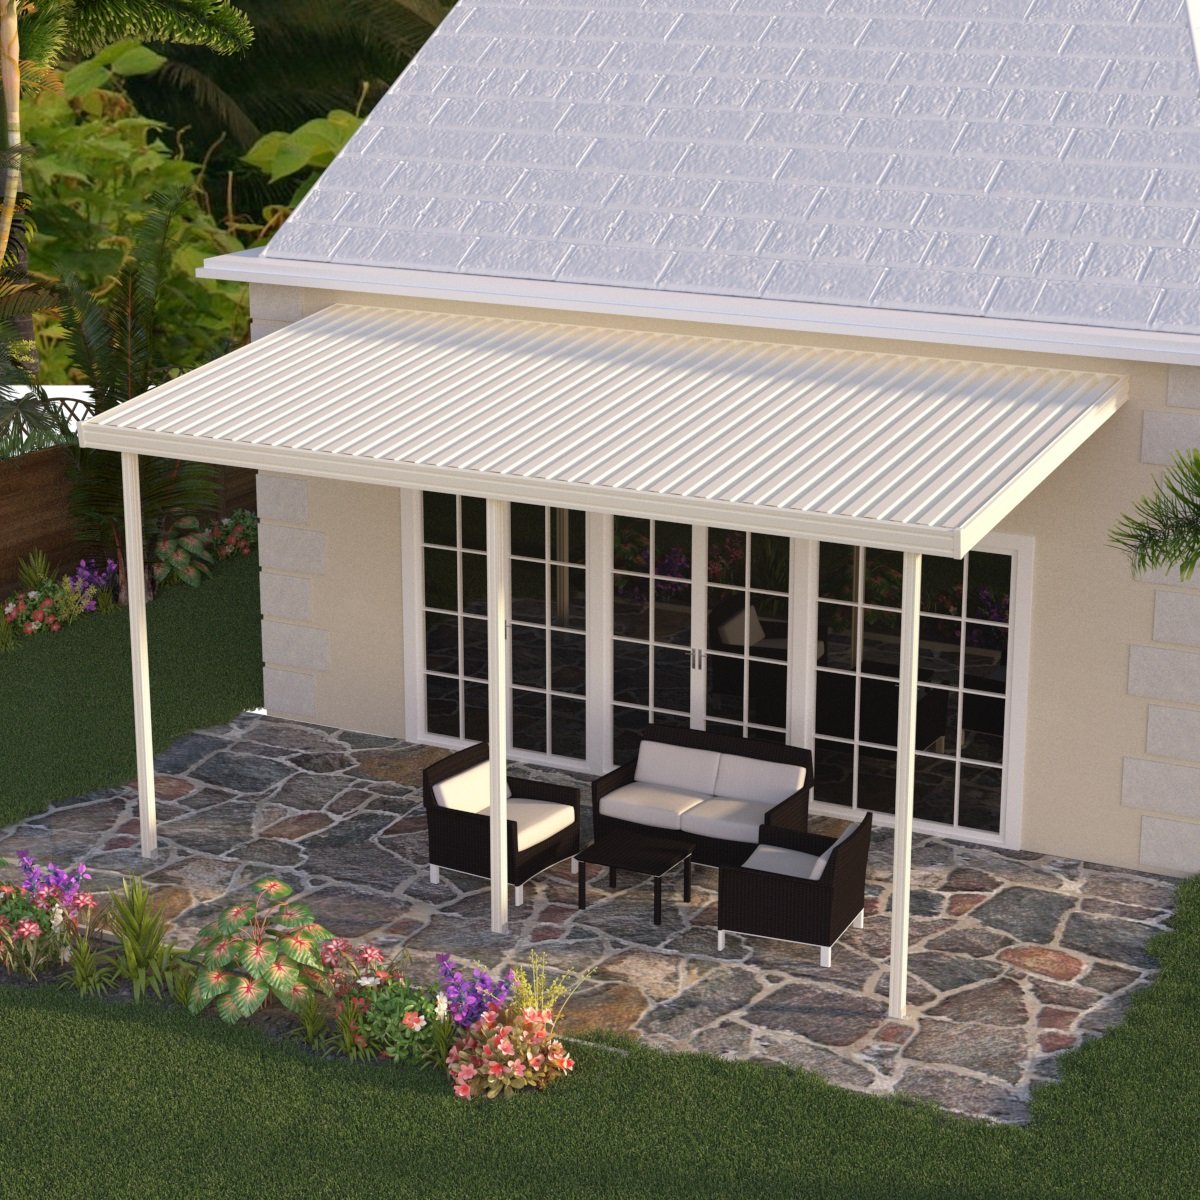 08 ft. Deep x 22 ft. Wide Ivory Attached Aluminum Patio Cover -3 Posts - (10lb Low Snow Area)